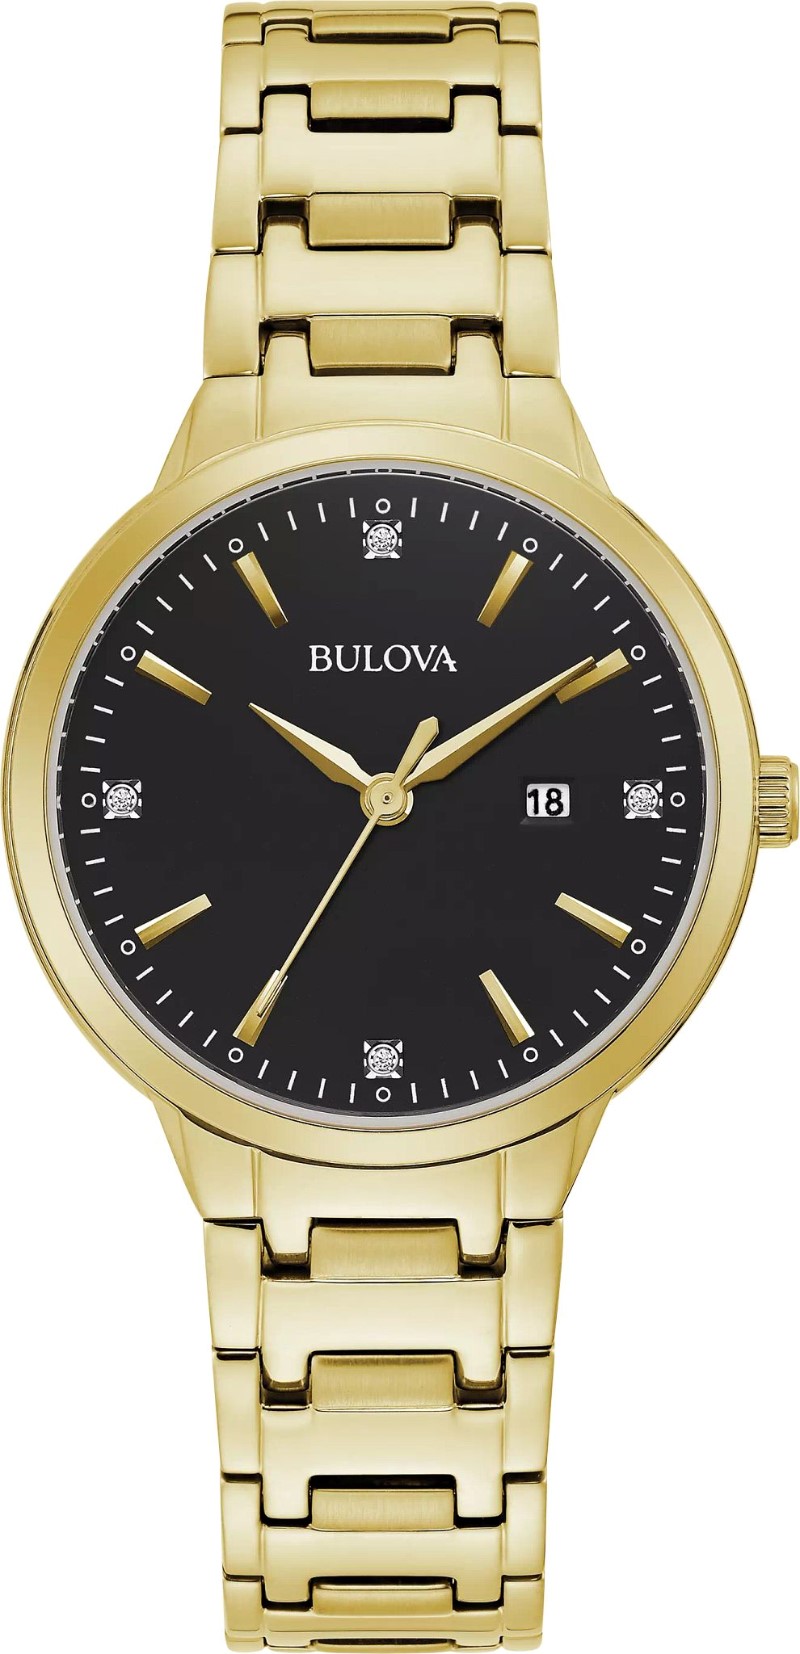 LADIES BULOVA CLASSIC WATCH GOLD TONE STAINLESS STEEL CASE  BLACK DIAL WITH DIAMONDS  AND GOLD TONE STAINLESS STEEL BRACELET STRAP